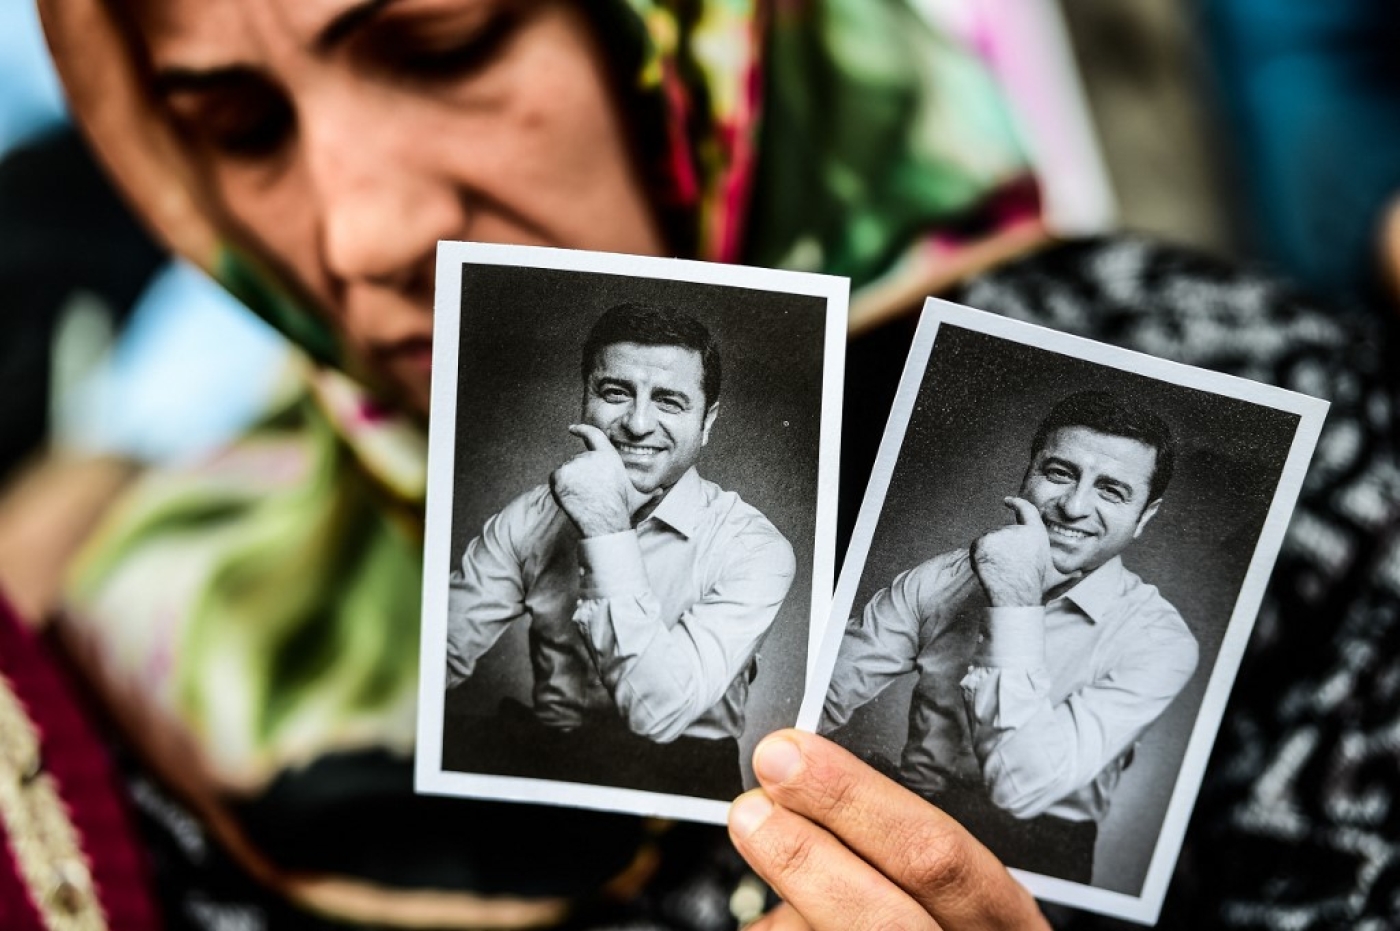 A woman holds pictures of former leader of the pro-Kurdish Peoples' Democratic Party HDP Selahattin Demirtas, in jail for a year and a half, and HDP candidate for the upcoming presidential election, during a rally on May 4, 2018 in Besiktas district of Istanbul. (AFP)